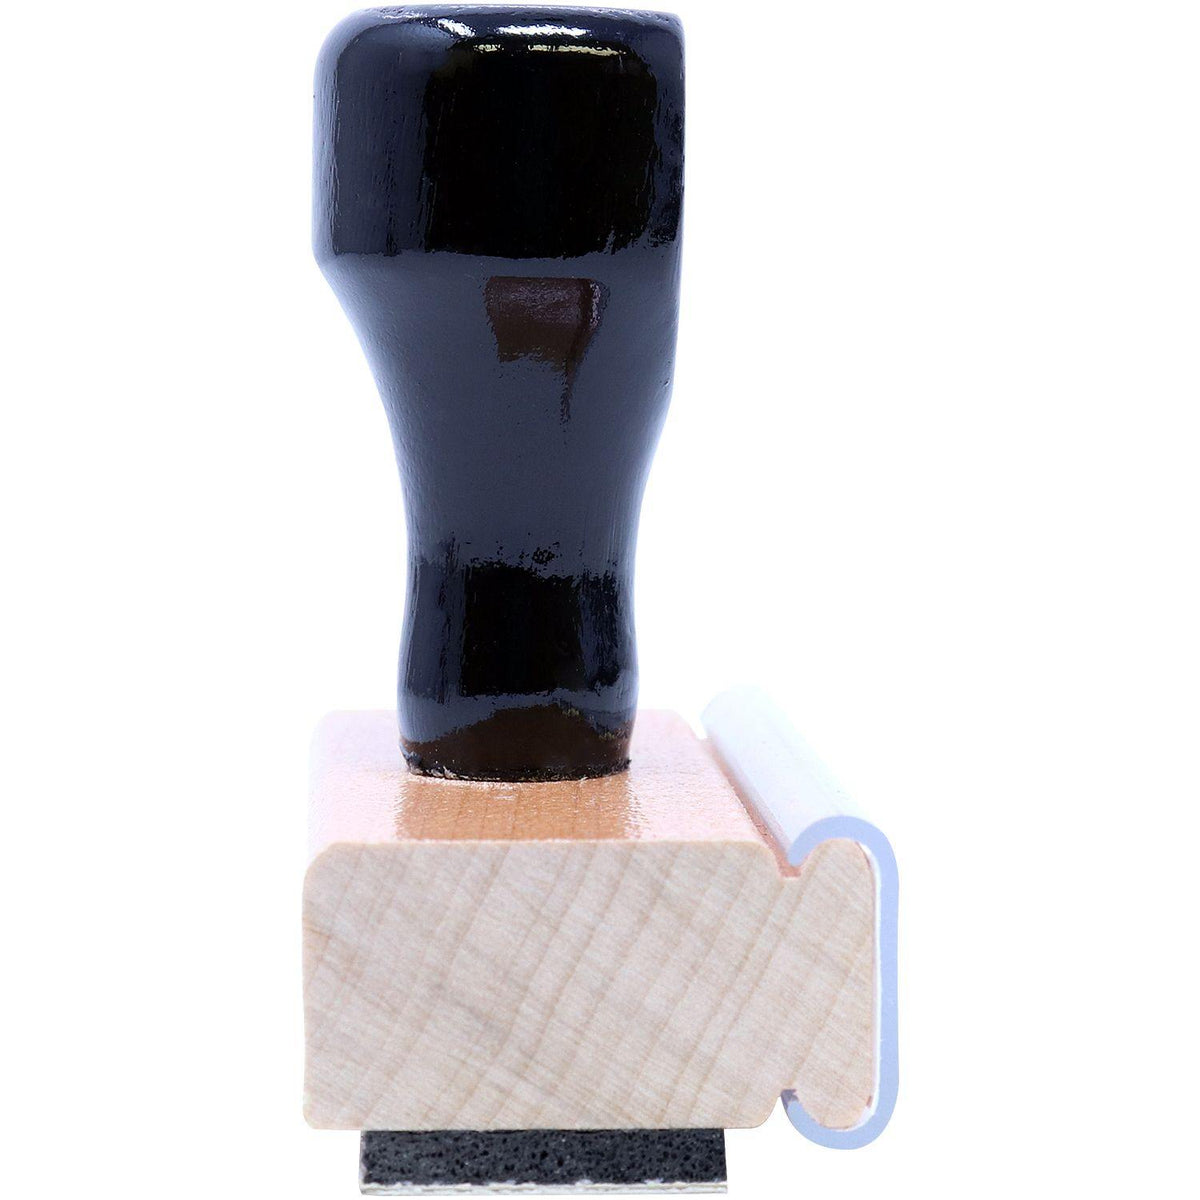 Side View of Large Received Unsealed Rubber Stamp